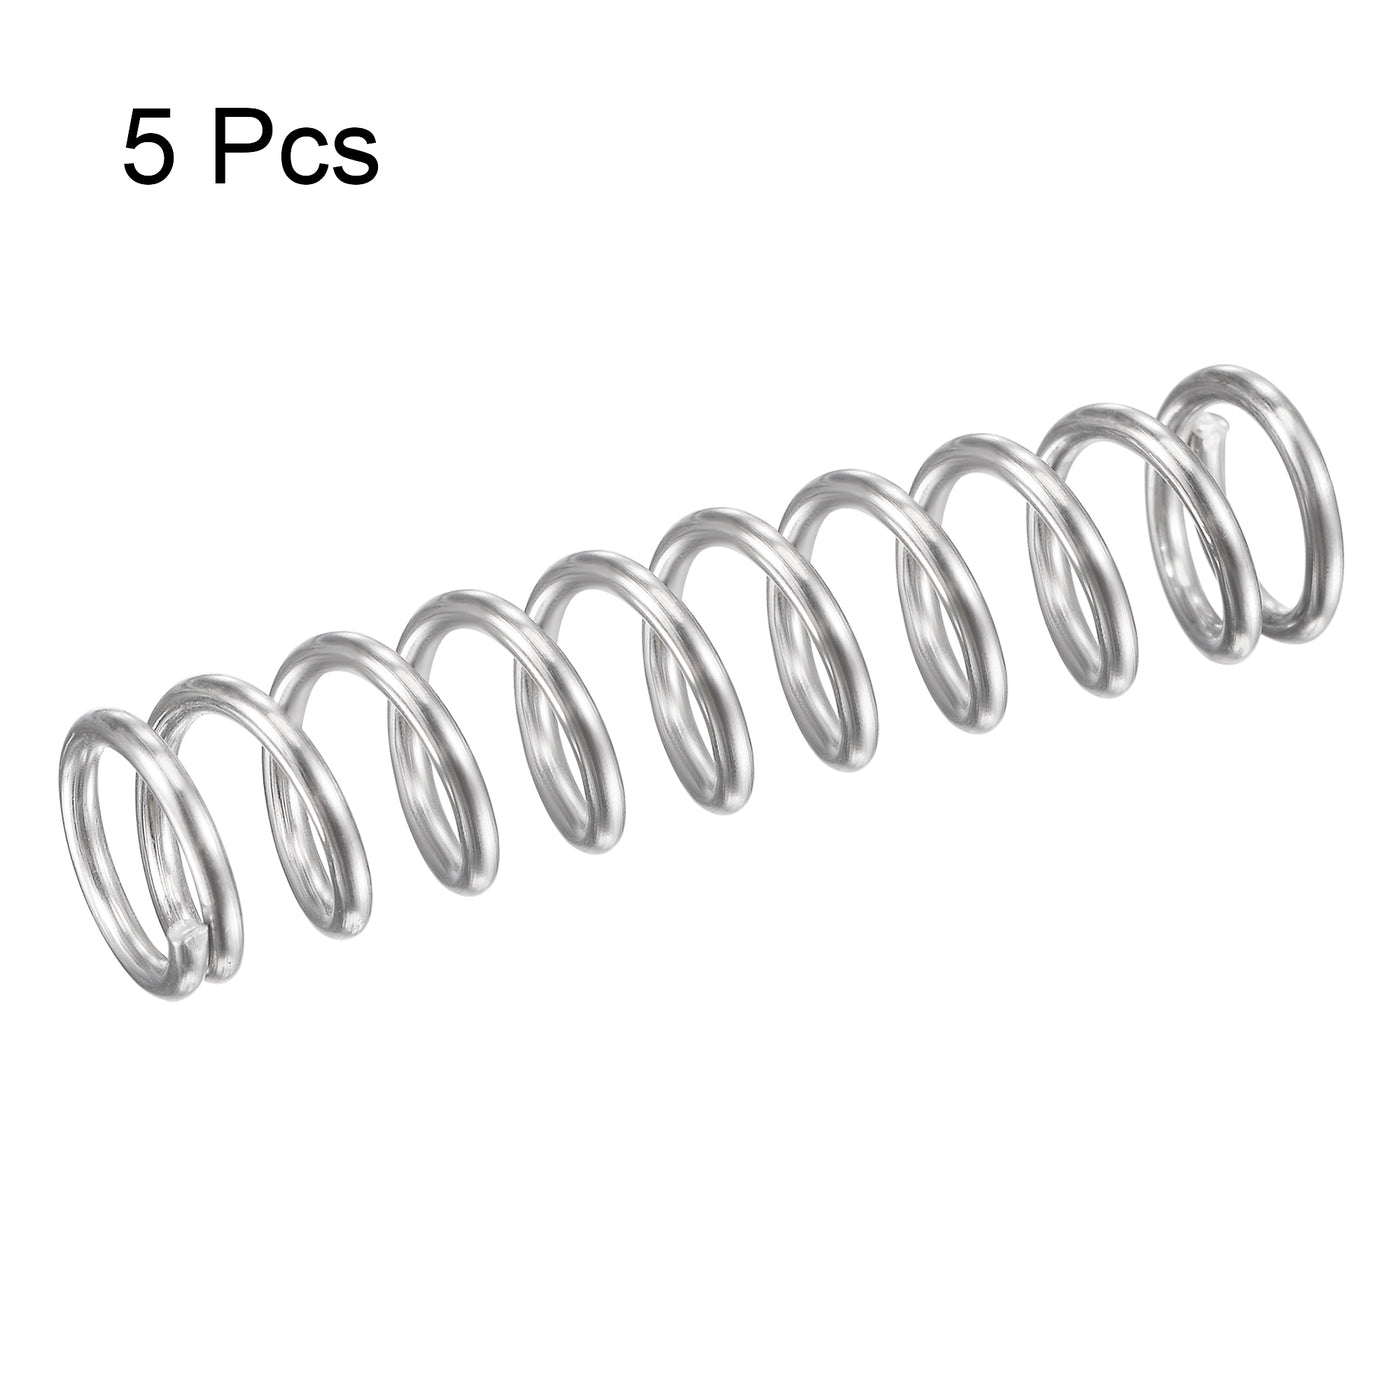 uxcell Uxcell 9mmx1.2mmx40mm 304 Stainless Steel Compression Spring 61.8N Load Capacity 5pcs